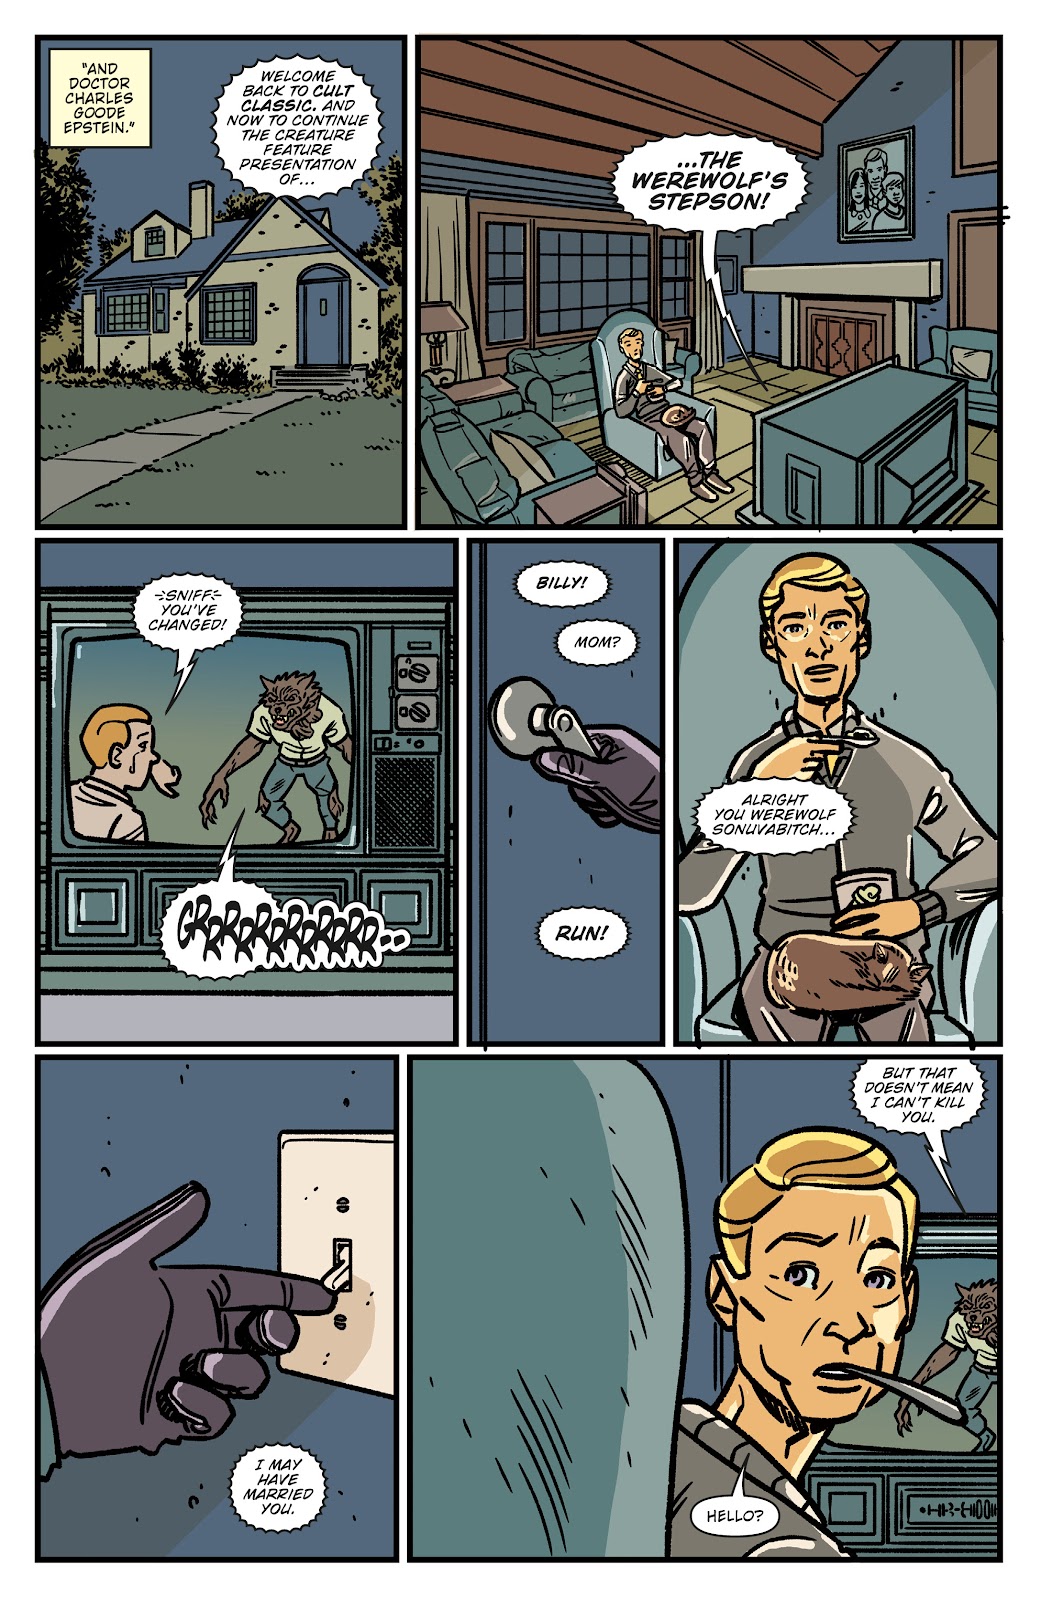 Cult Classic: Return to Whisper issue 2 & 3 - Page 39